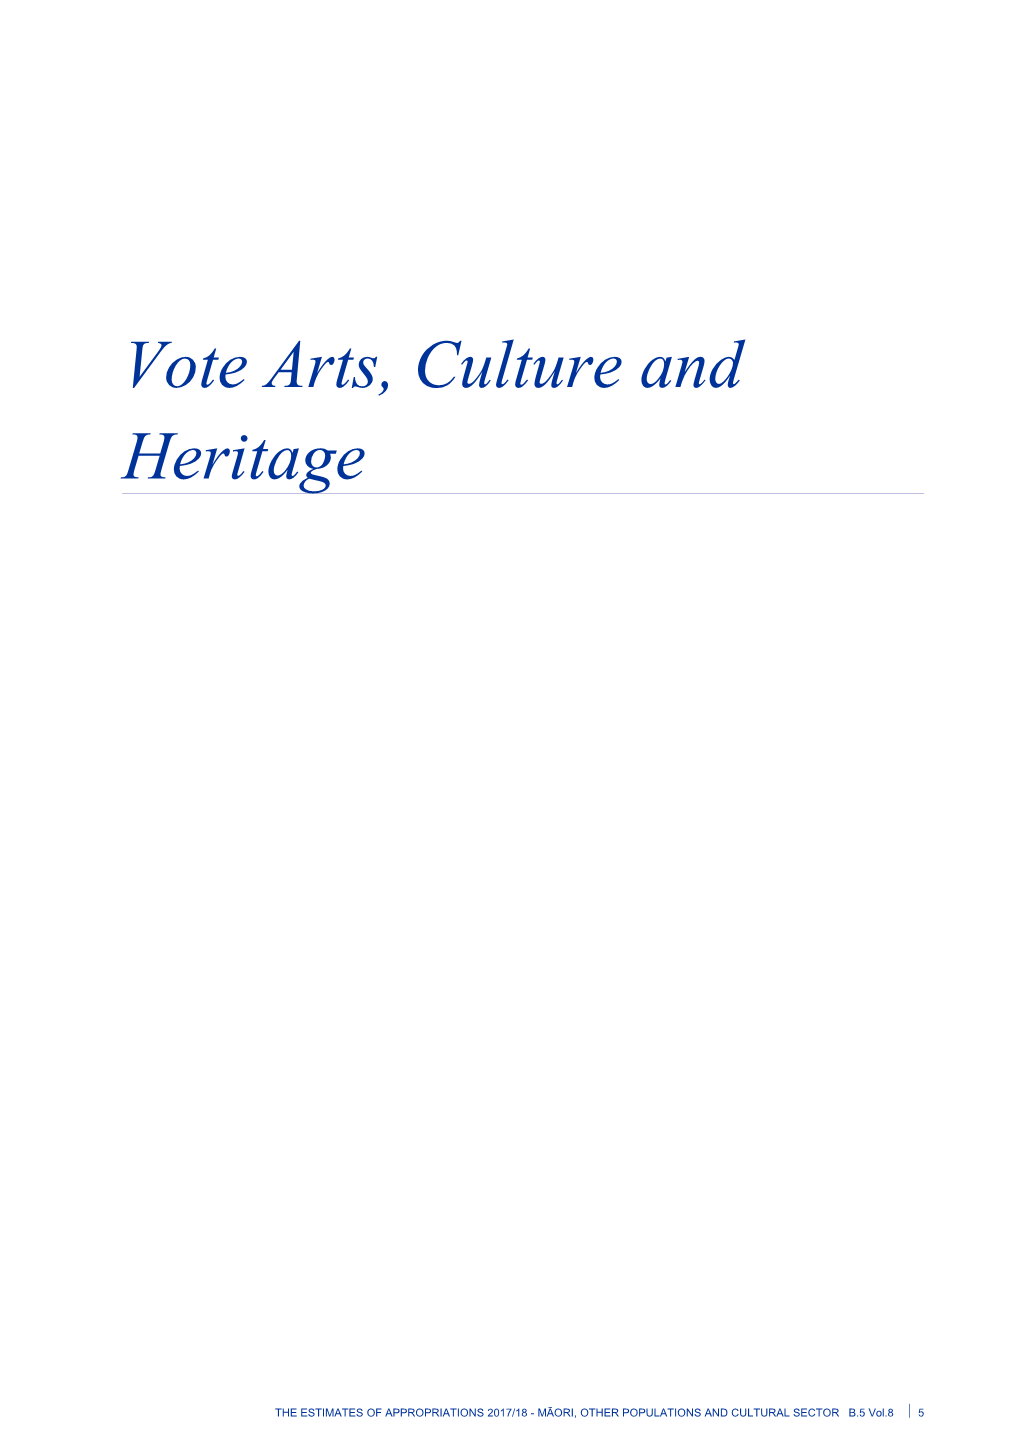 Vote Arts, Culture and Heritage - Vol 8 Māori, Other Populations and Cultural Sector